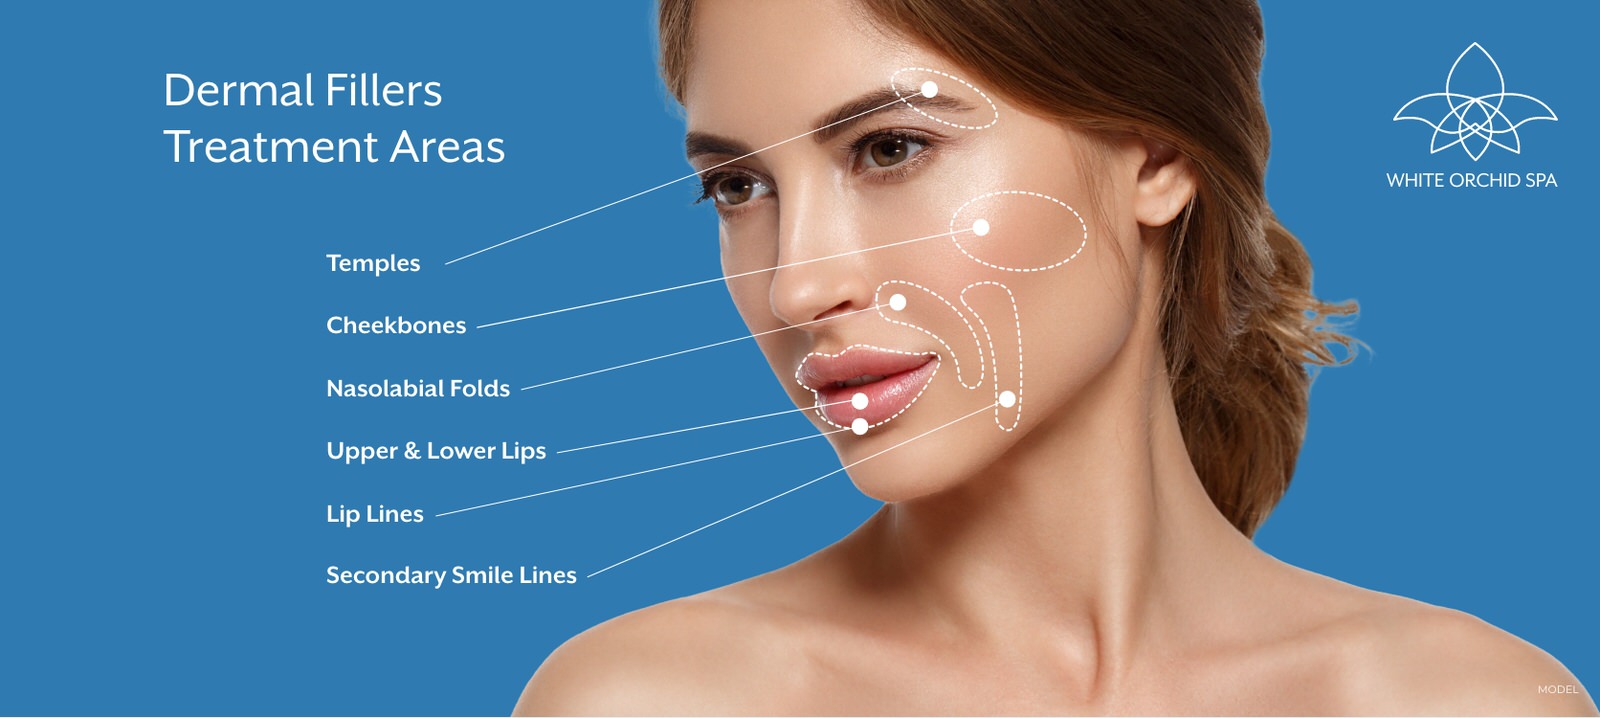 Dermal fillers treatment areas include the temples, cheekbones, nasolabial folds, upper & lower lips, lip lines, and secondary smile lines